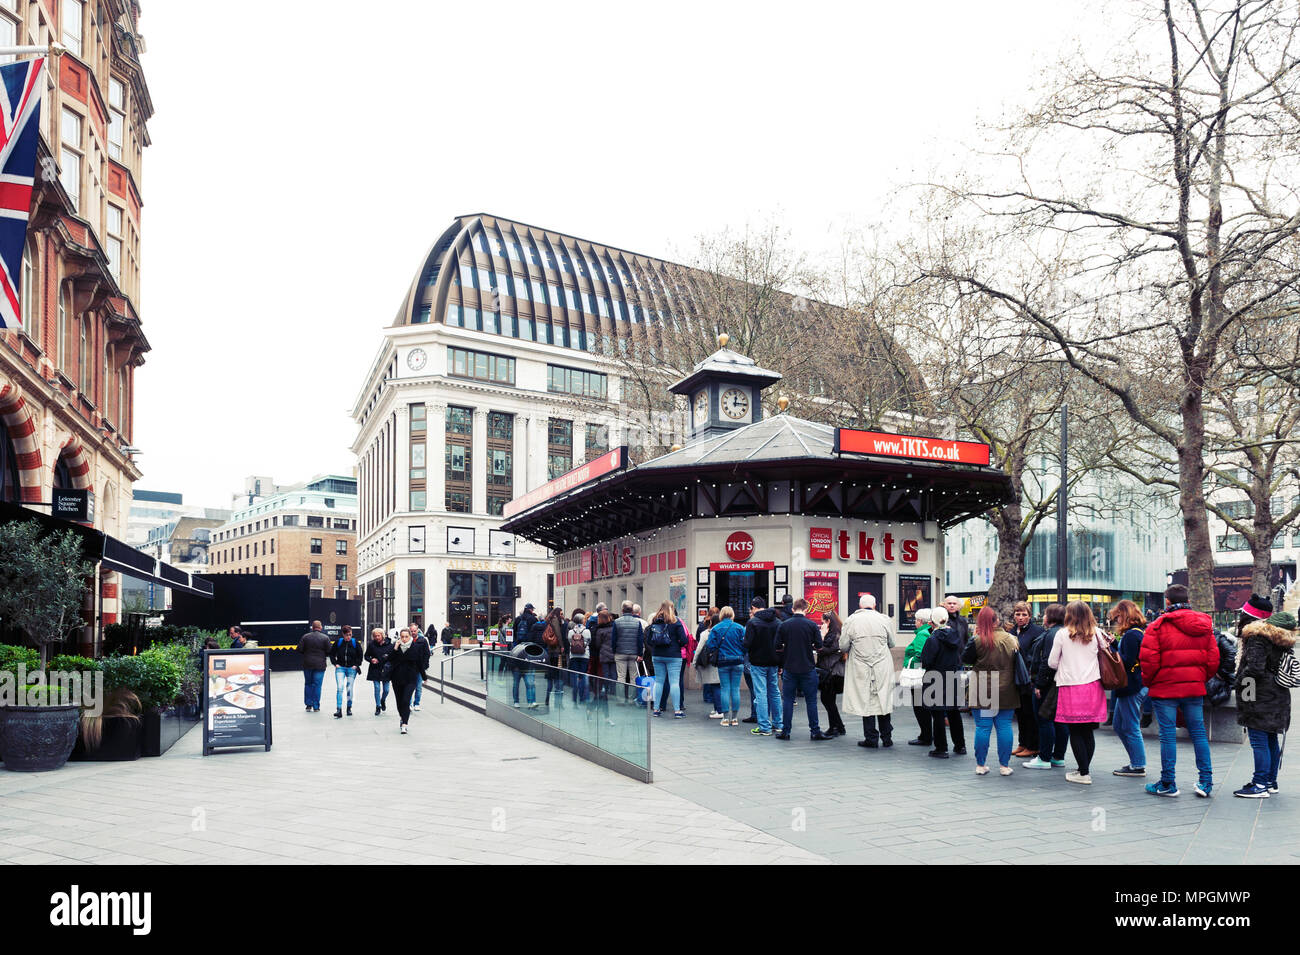 London, UK - April 2018: People queue for buying tickets from TKTS, the official London theatre ticket booth located at Leicester Square Stock Photo